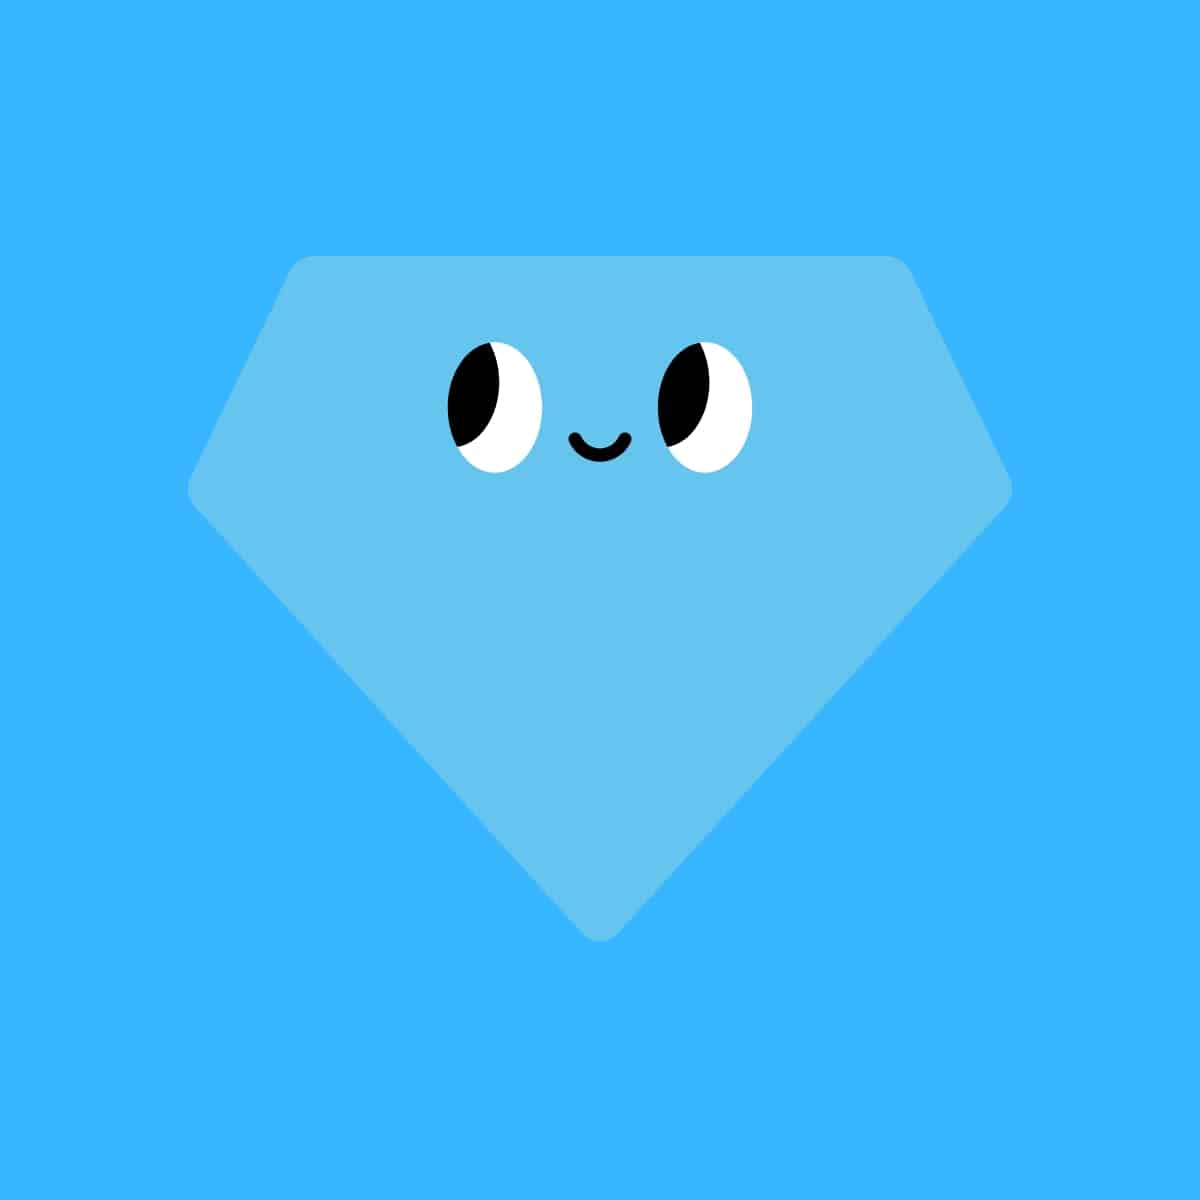 Cartoon graphic of a blue diamond with a smiling face on a blue background.